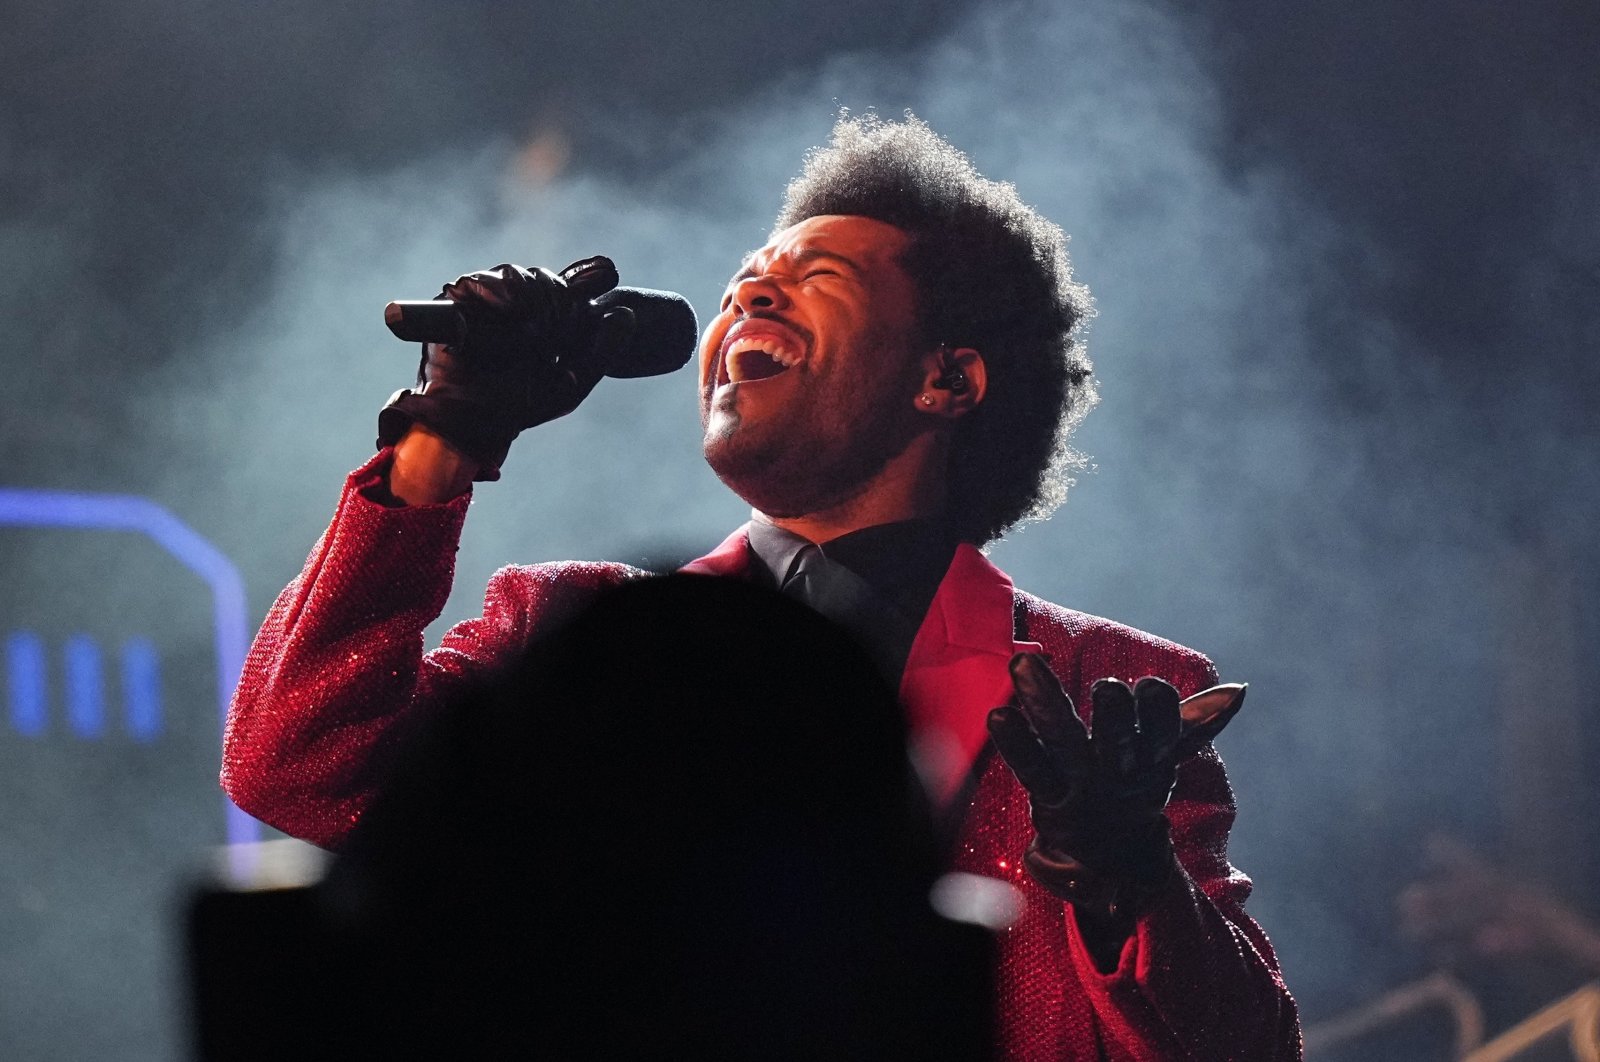 The Weeknd performs during the halftime show of the NFL Super Bowl 55 football game on Feb. 7, 2021, in Tampa, Fla. (AP Photo)